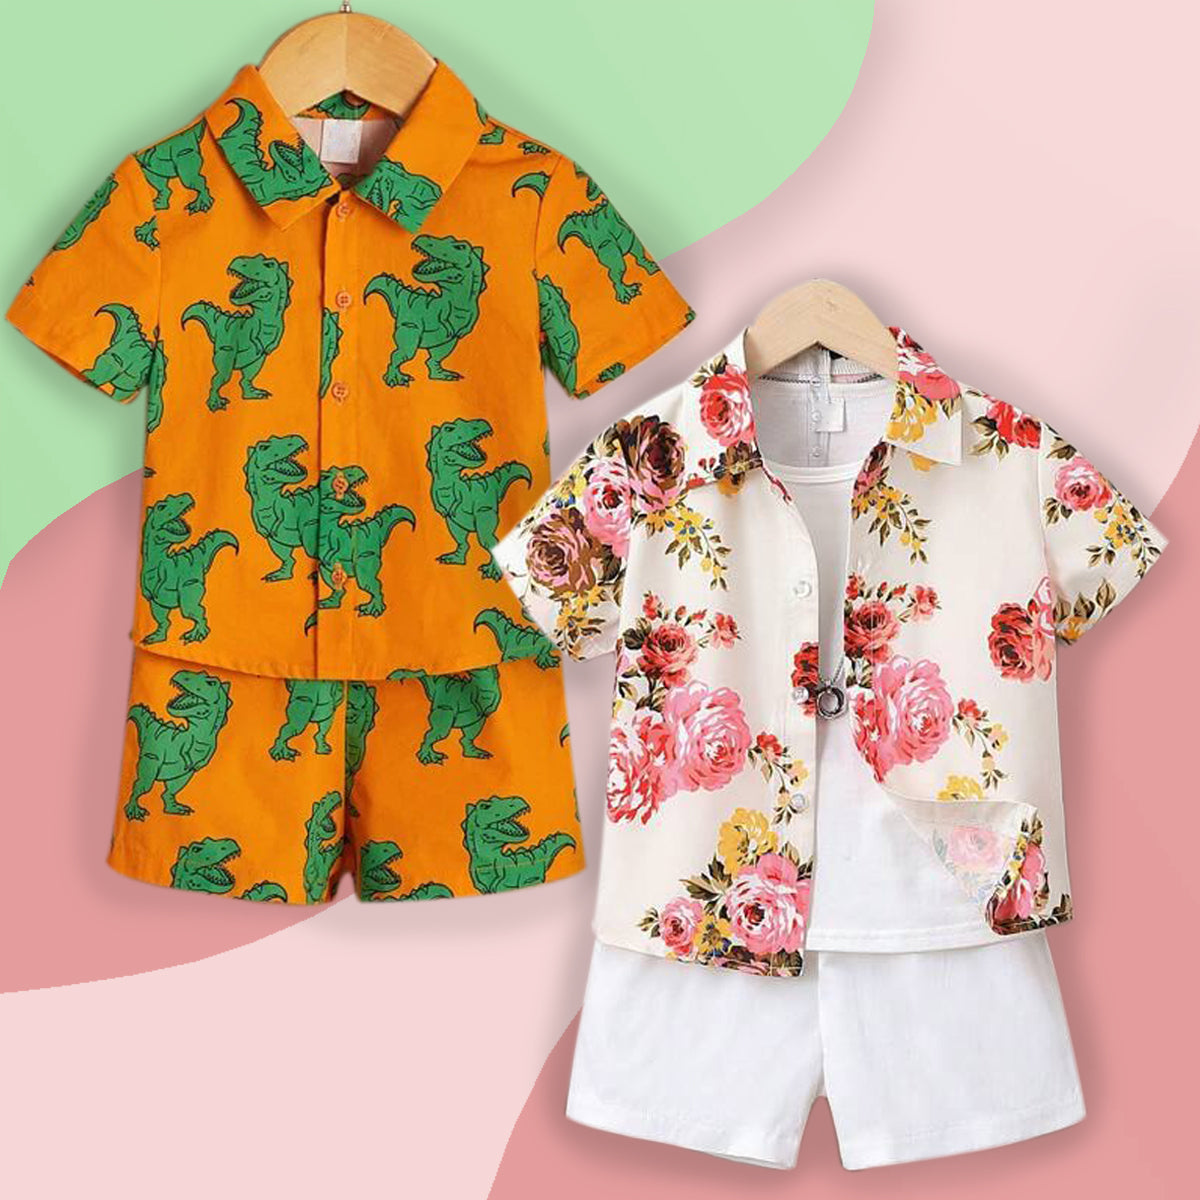 Venutaloza Baby Set Floral & Dinosaur (Combo Pack Of 2) Shirt & Shorts Without tee Two Piece Set For Boy & Girls.